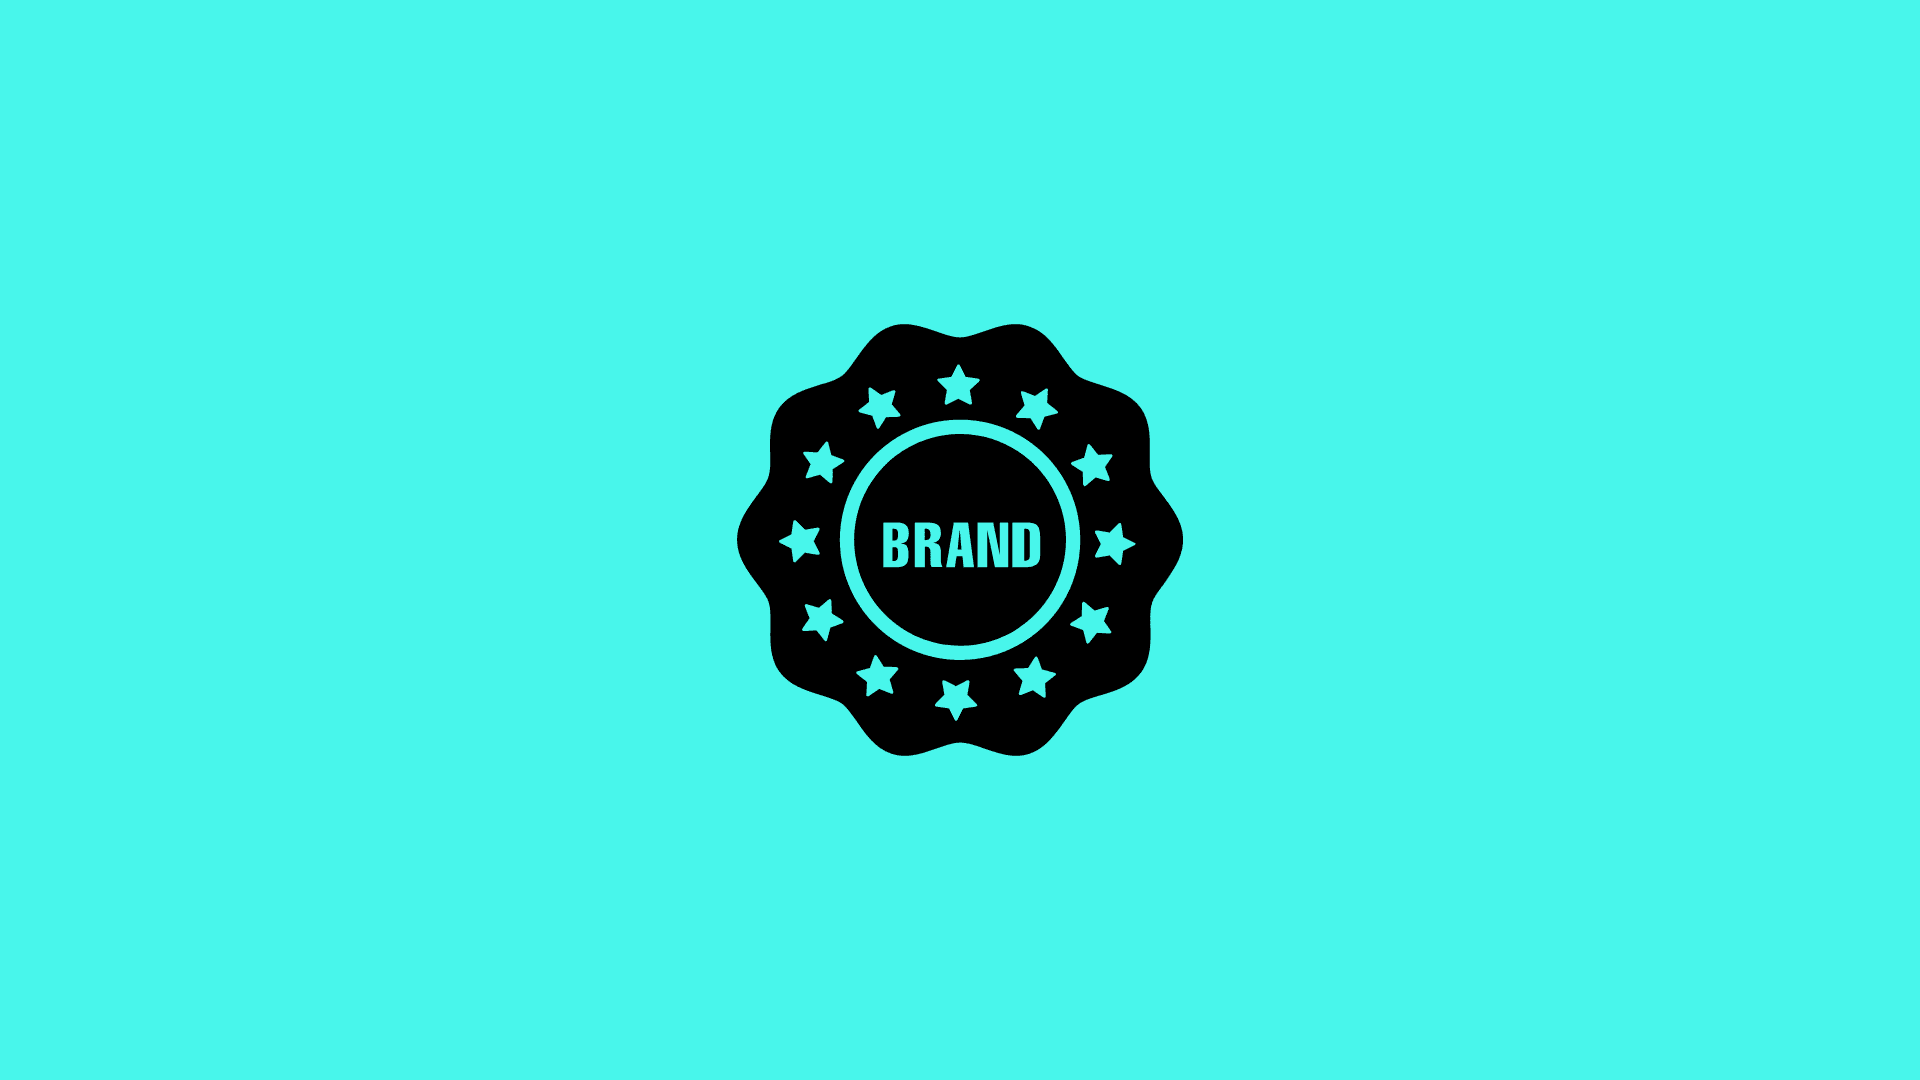 Guide for your branding strategy